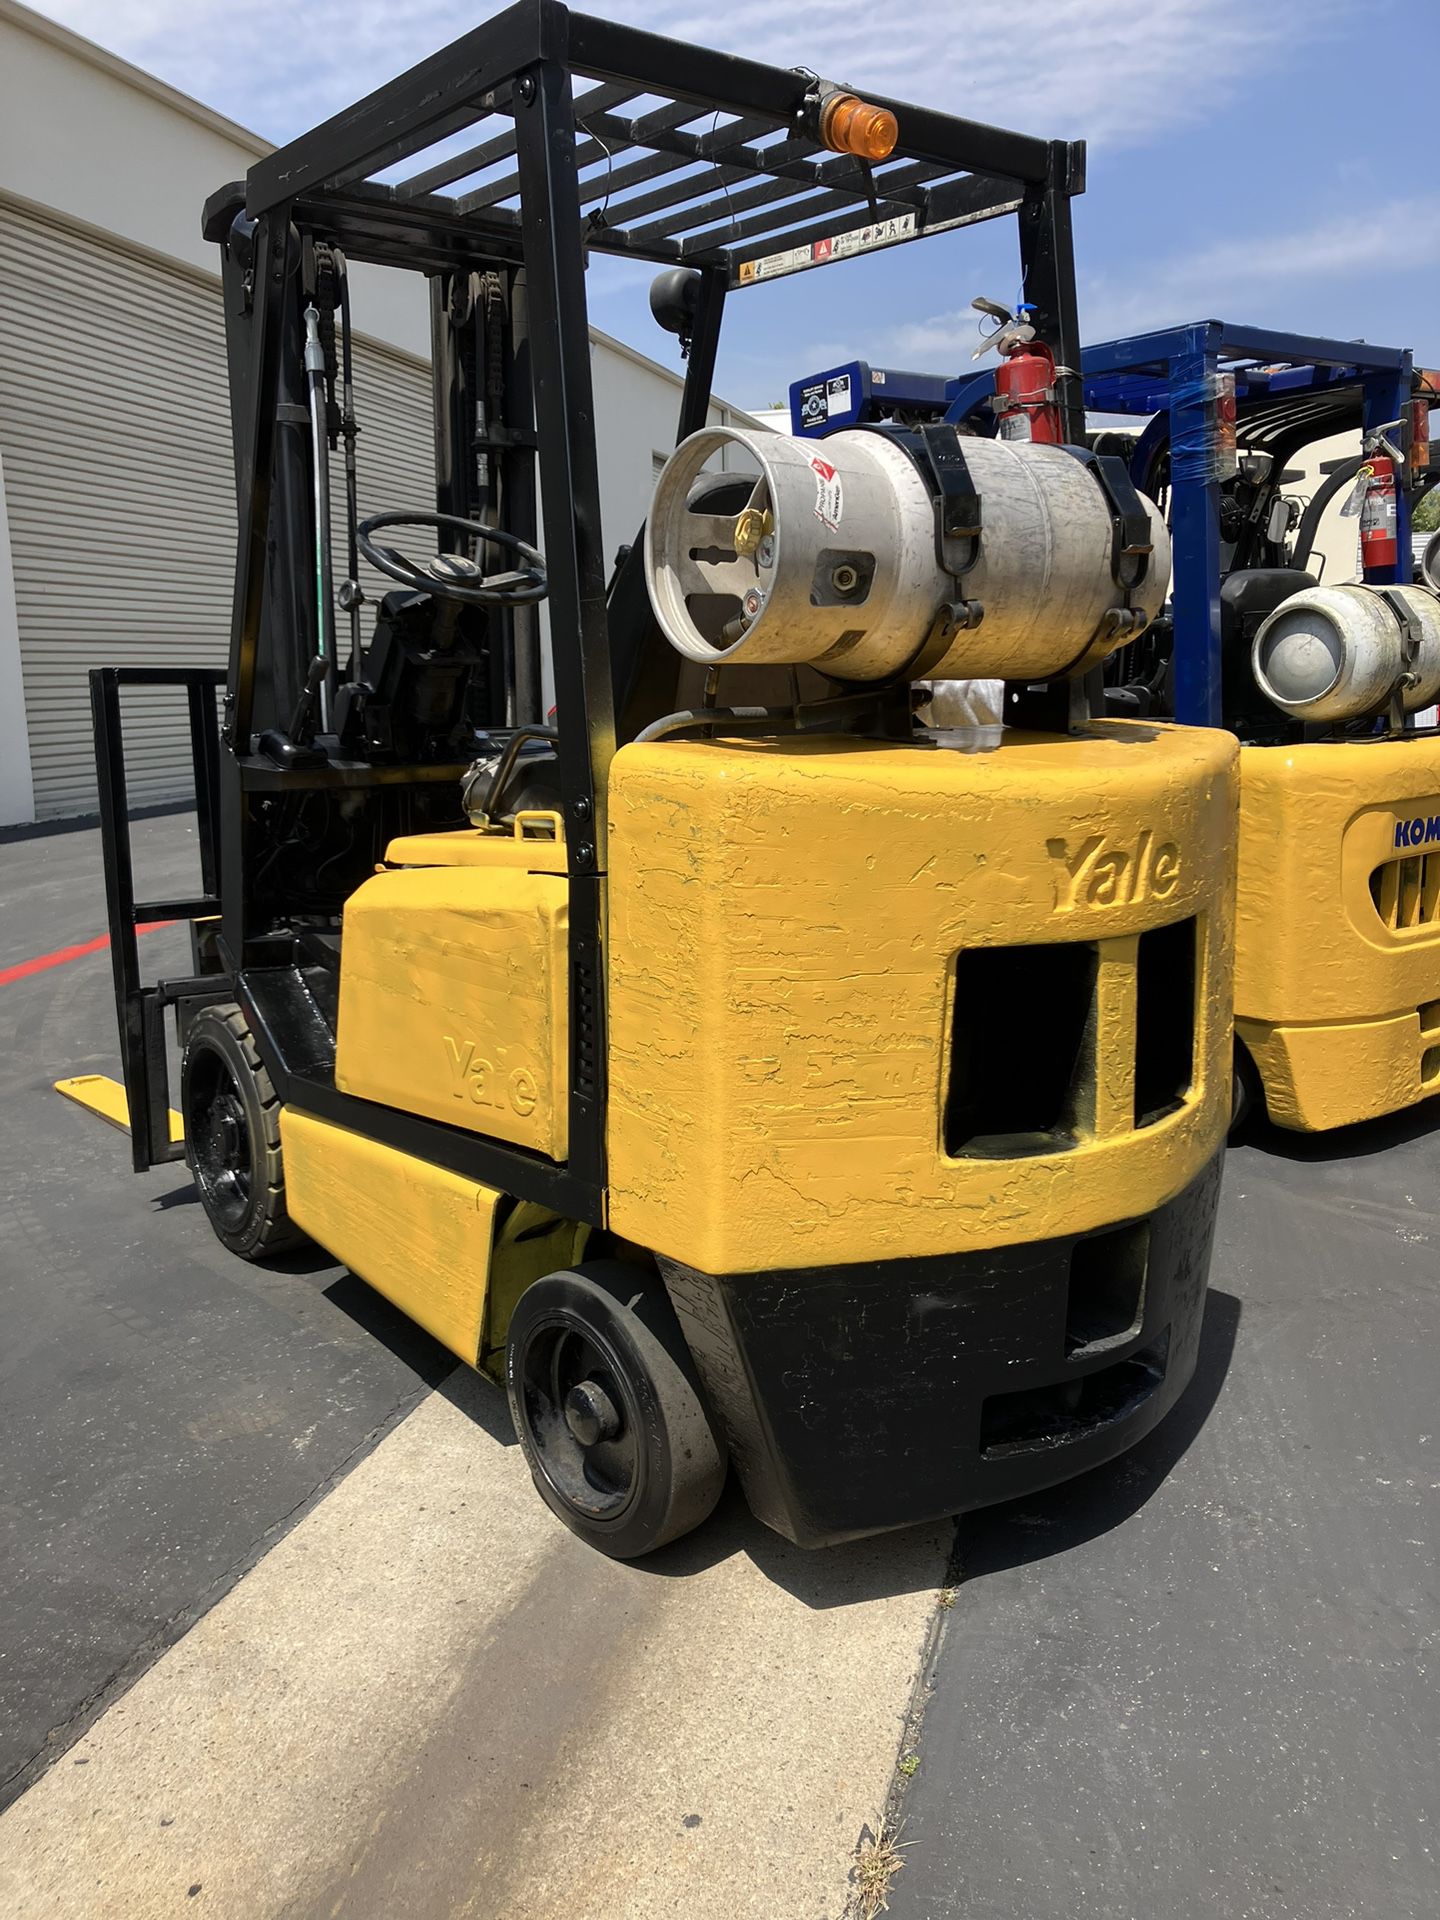 Yale Forklift 5000lb 3 Stage With Side shift